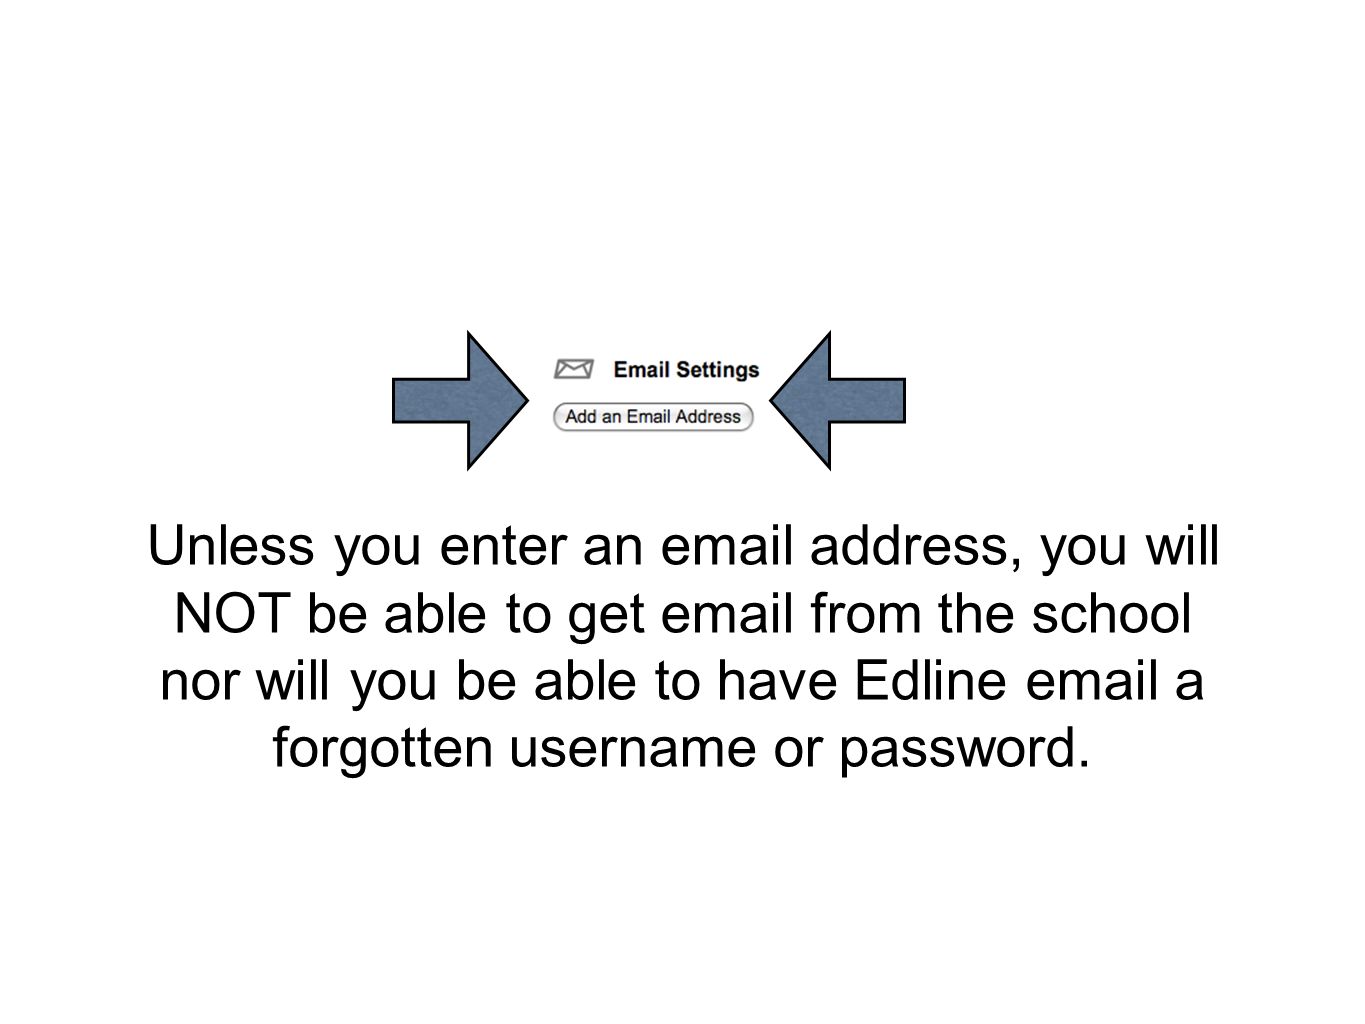 Unless you enter an  address, you will NOT be able to get  from the school nor will you be able to have Edline  a forgotten username or password.